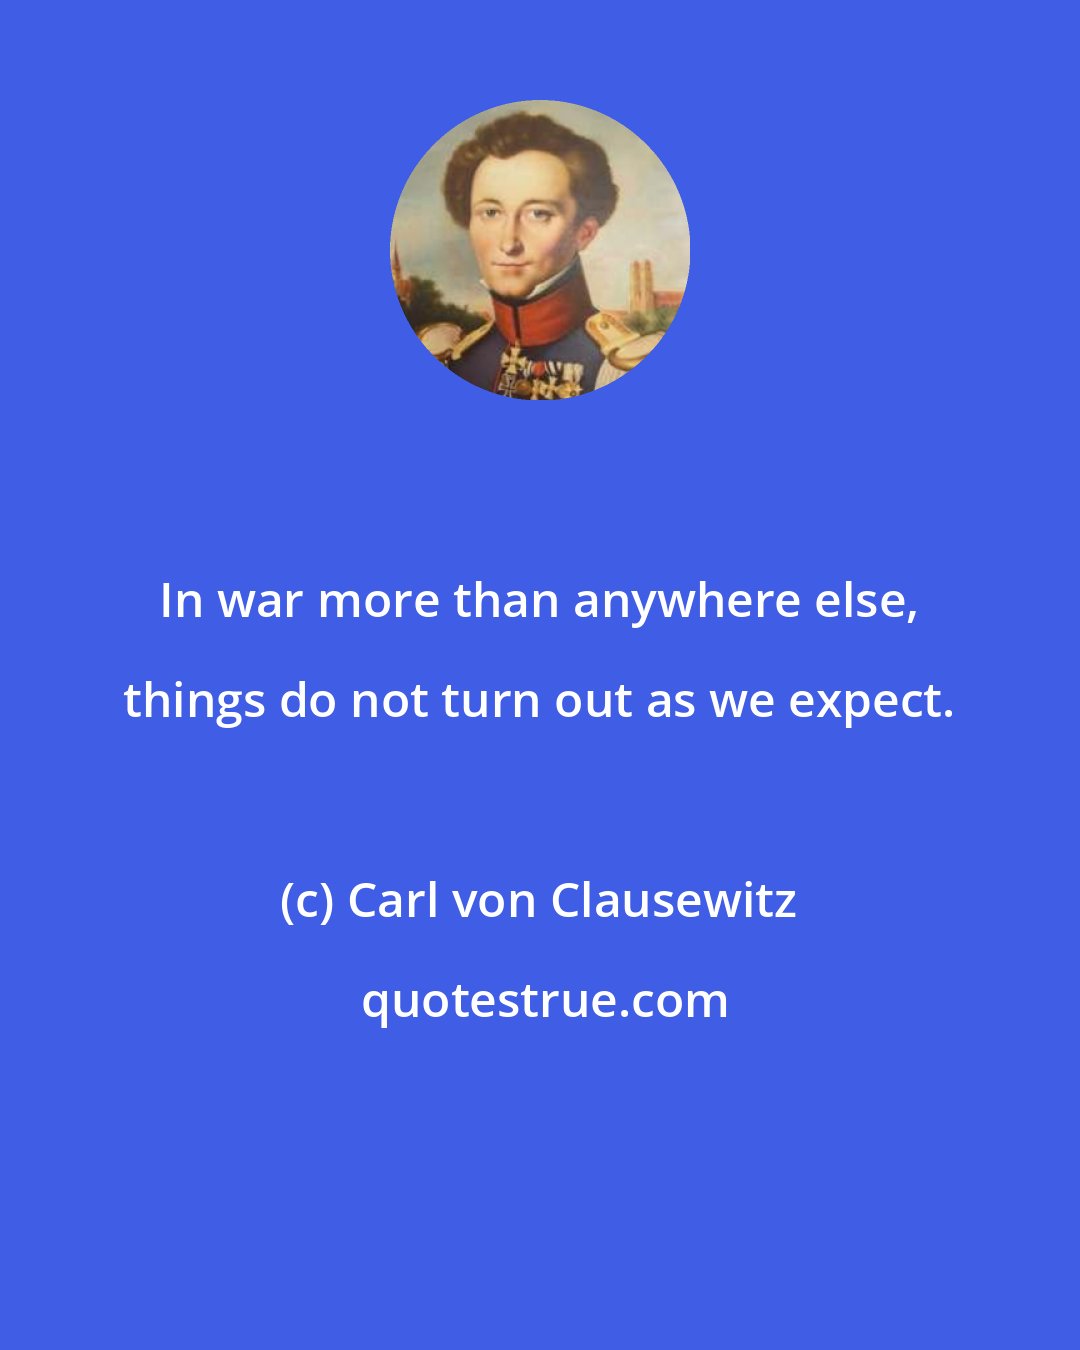 Carl von Clausewitz: In war more than anywhere else, things do not turn out as we expect.